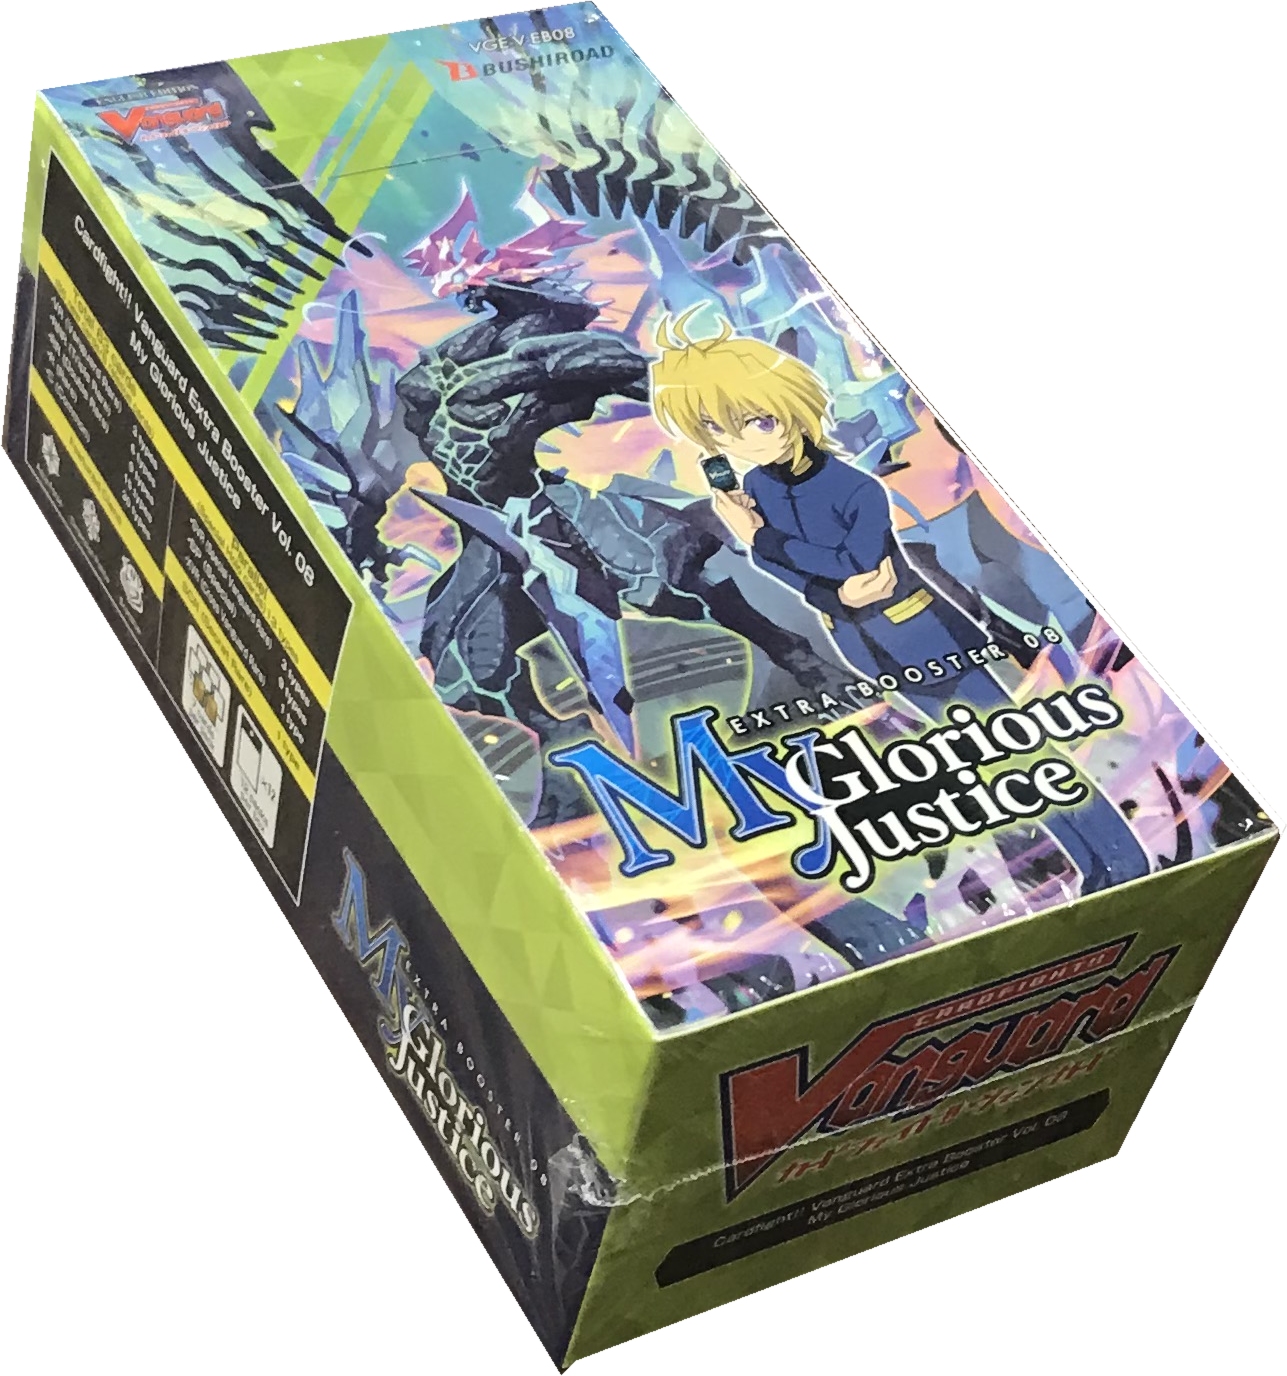 5x Cardfight! Vanguard My Glorious Justice Booster Packs